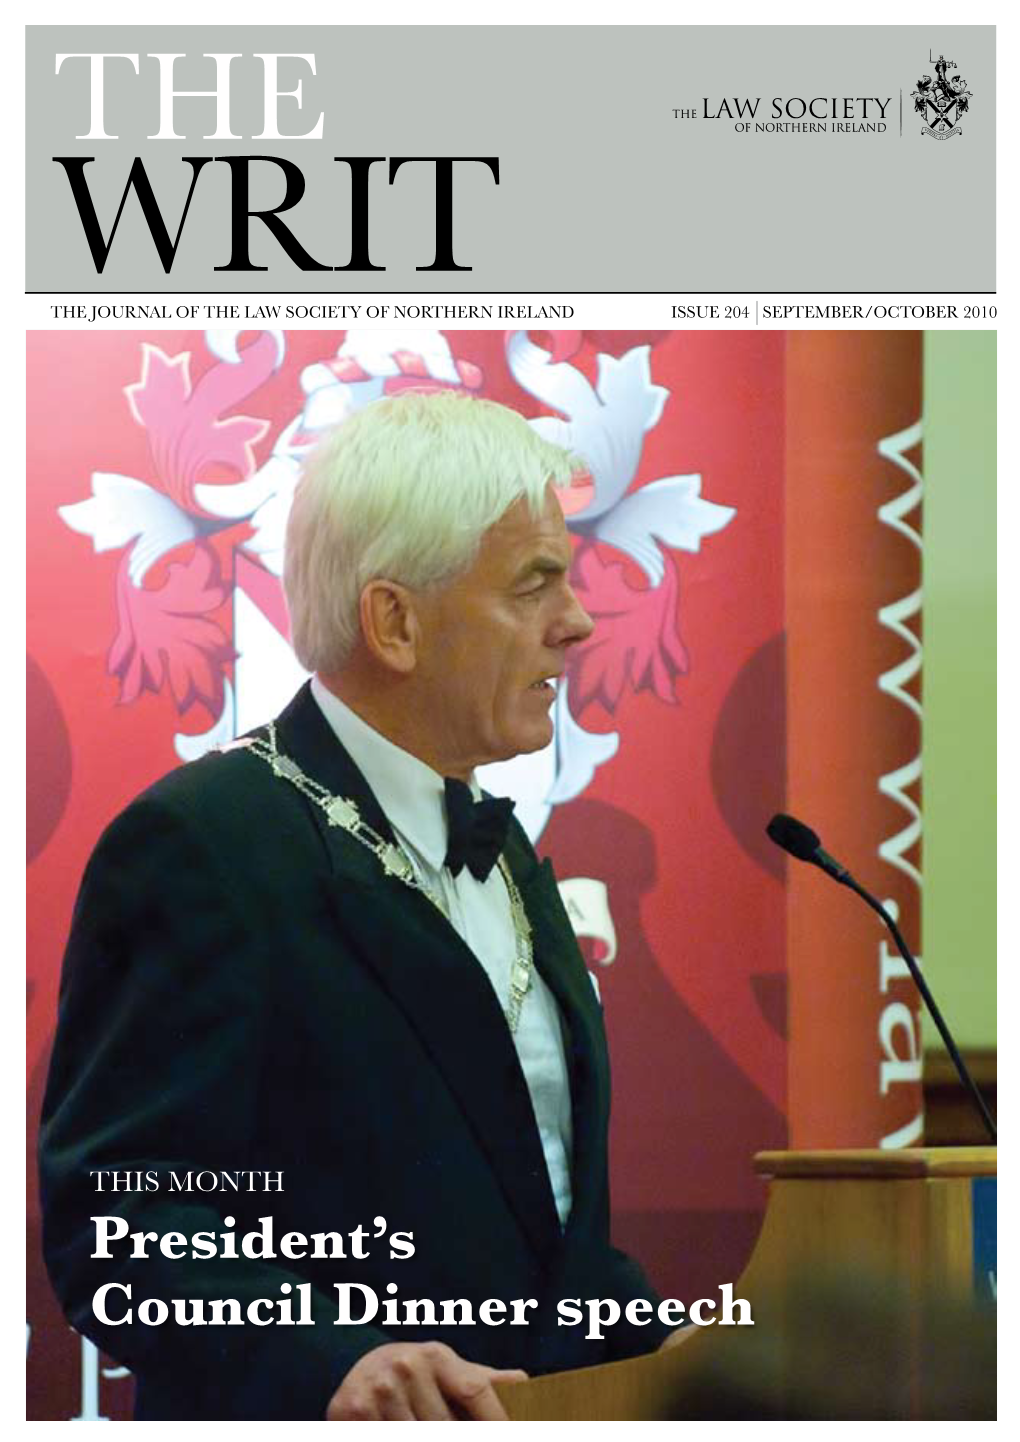 Writ the Journal of the Law Society of Northern Ireland Issue 204 September/October 2010